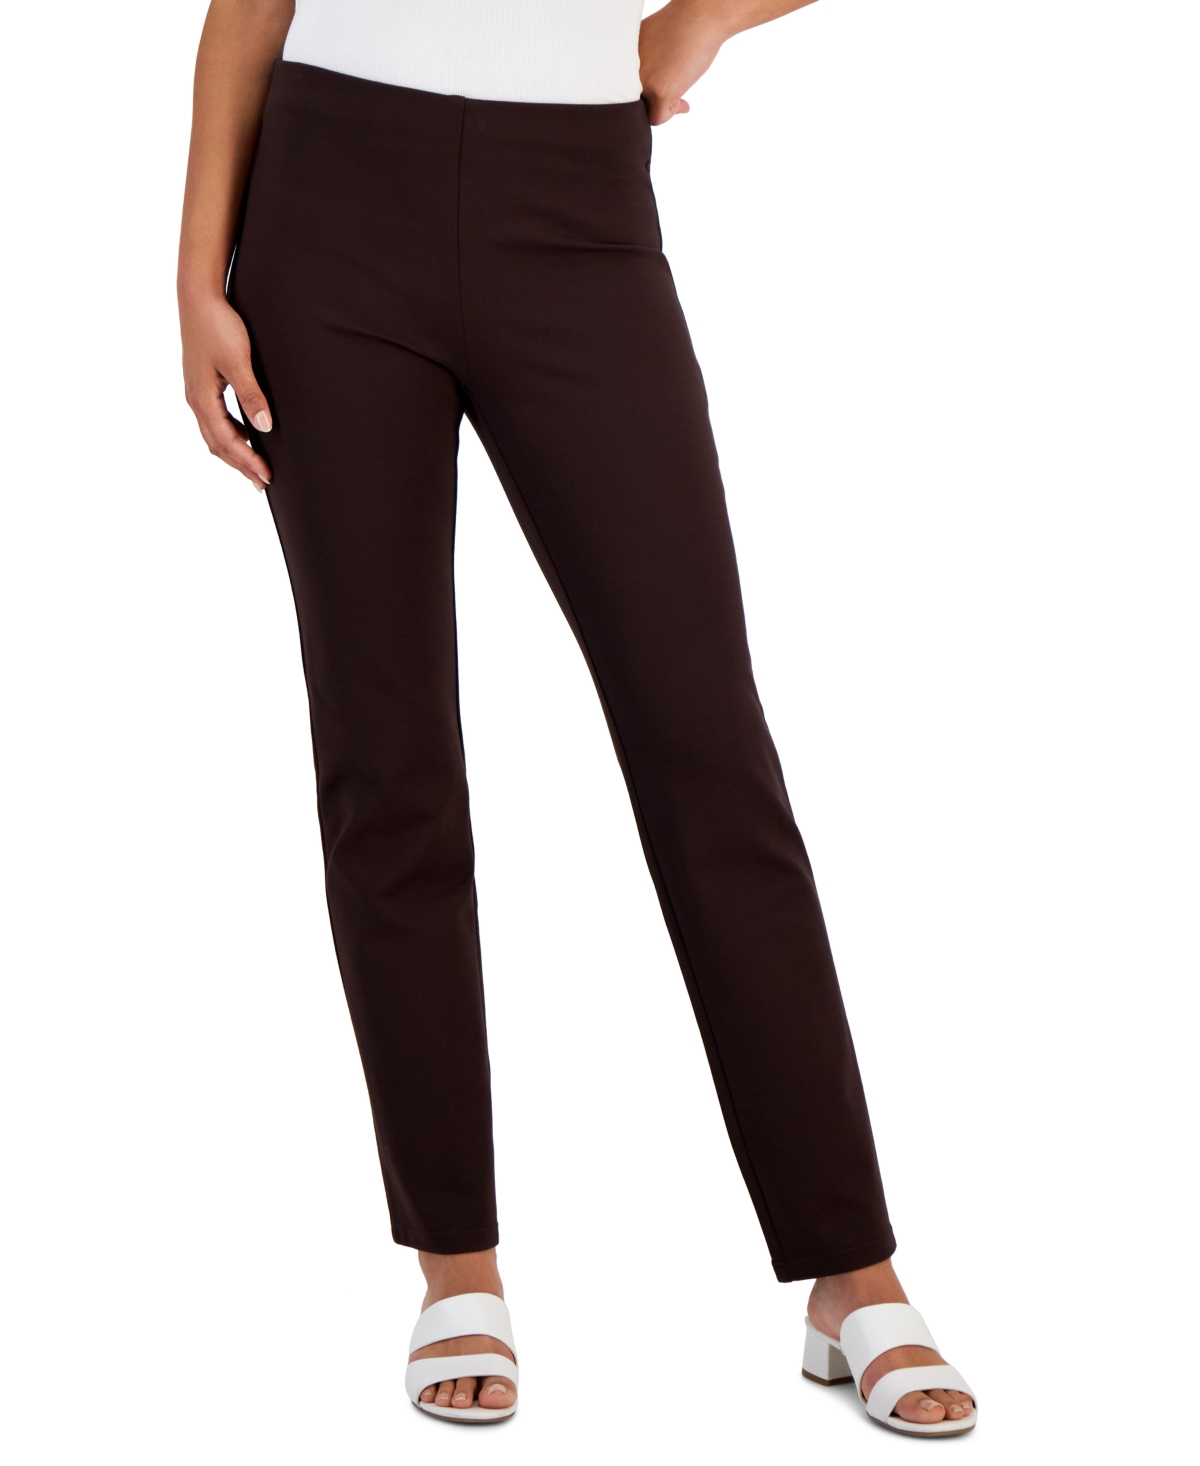 JM Collection Women's Petite Studded Pull On Pants at